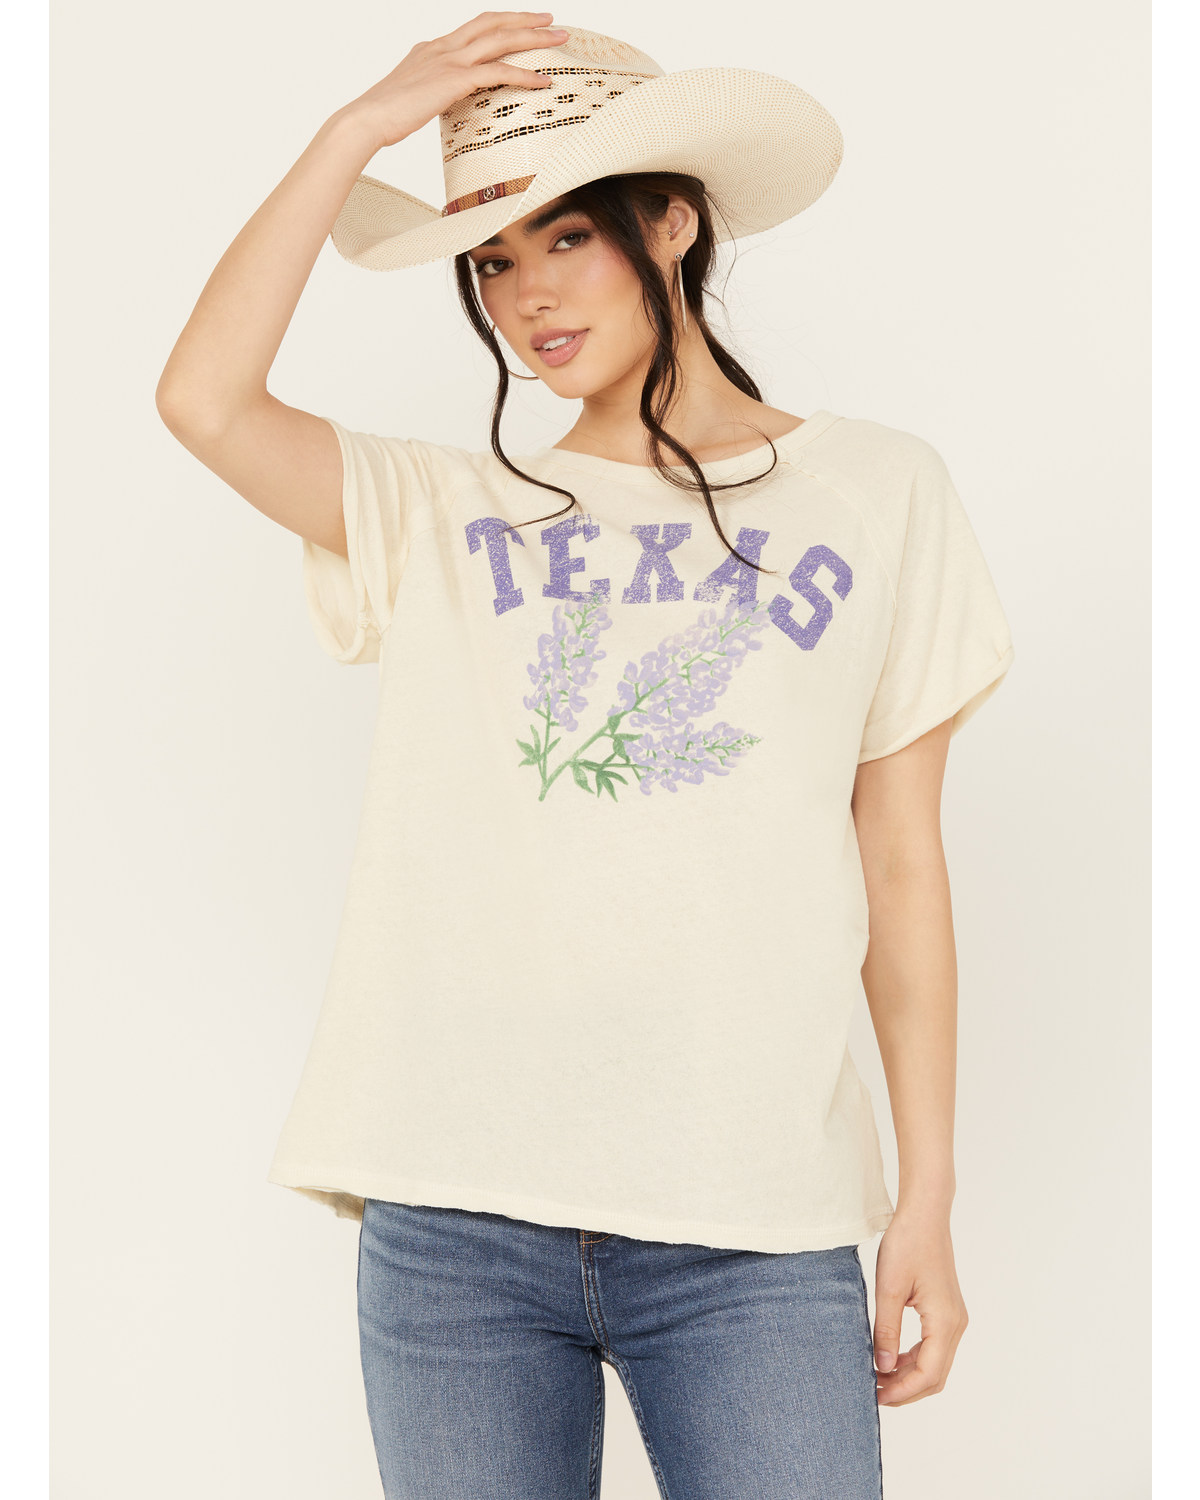 Free People Women's Texas State Flower Short Sleeve Graphic Tee